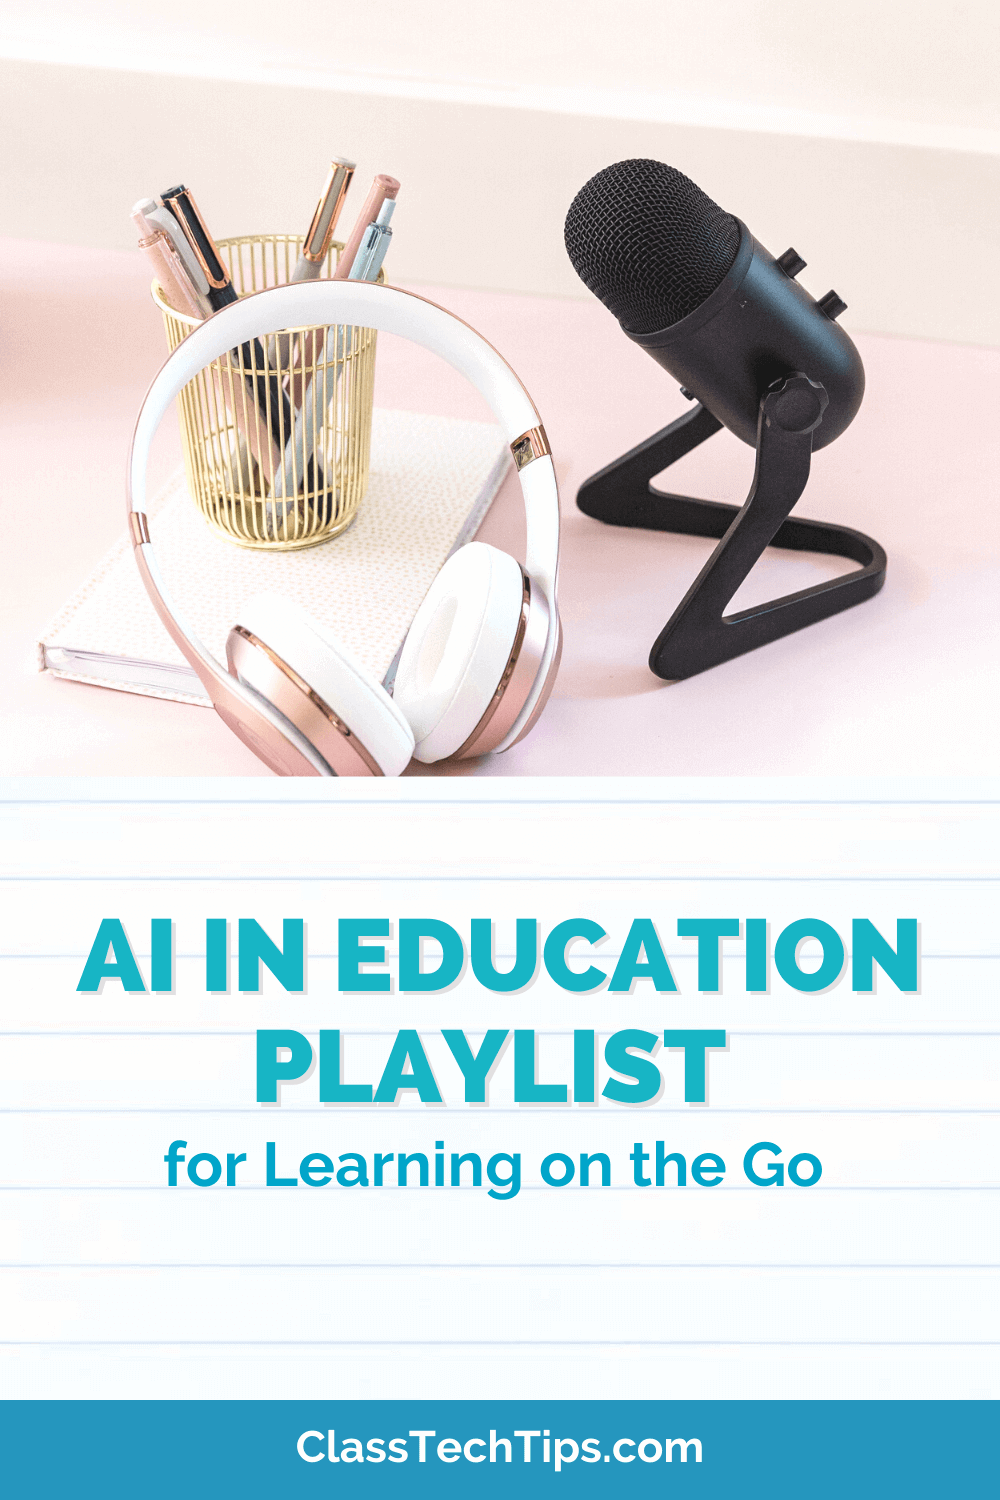 Desk equipped with pencils, headphones, and a microphone, symbolizing the tools for exploring our AI in Education Playlist blog post.